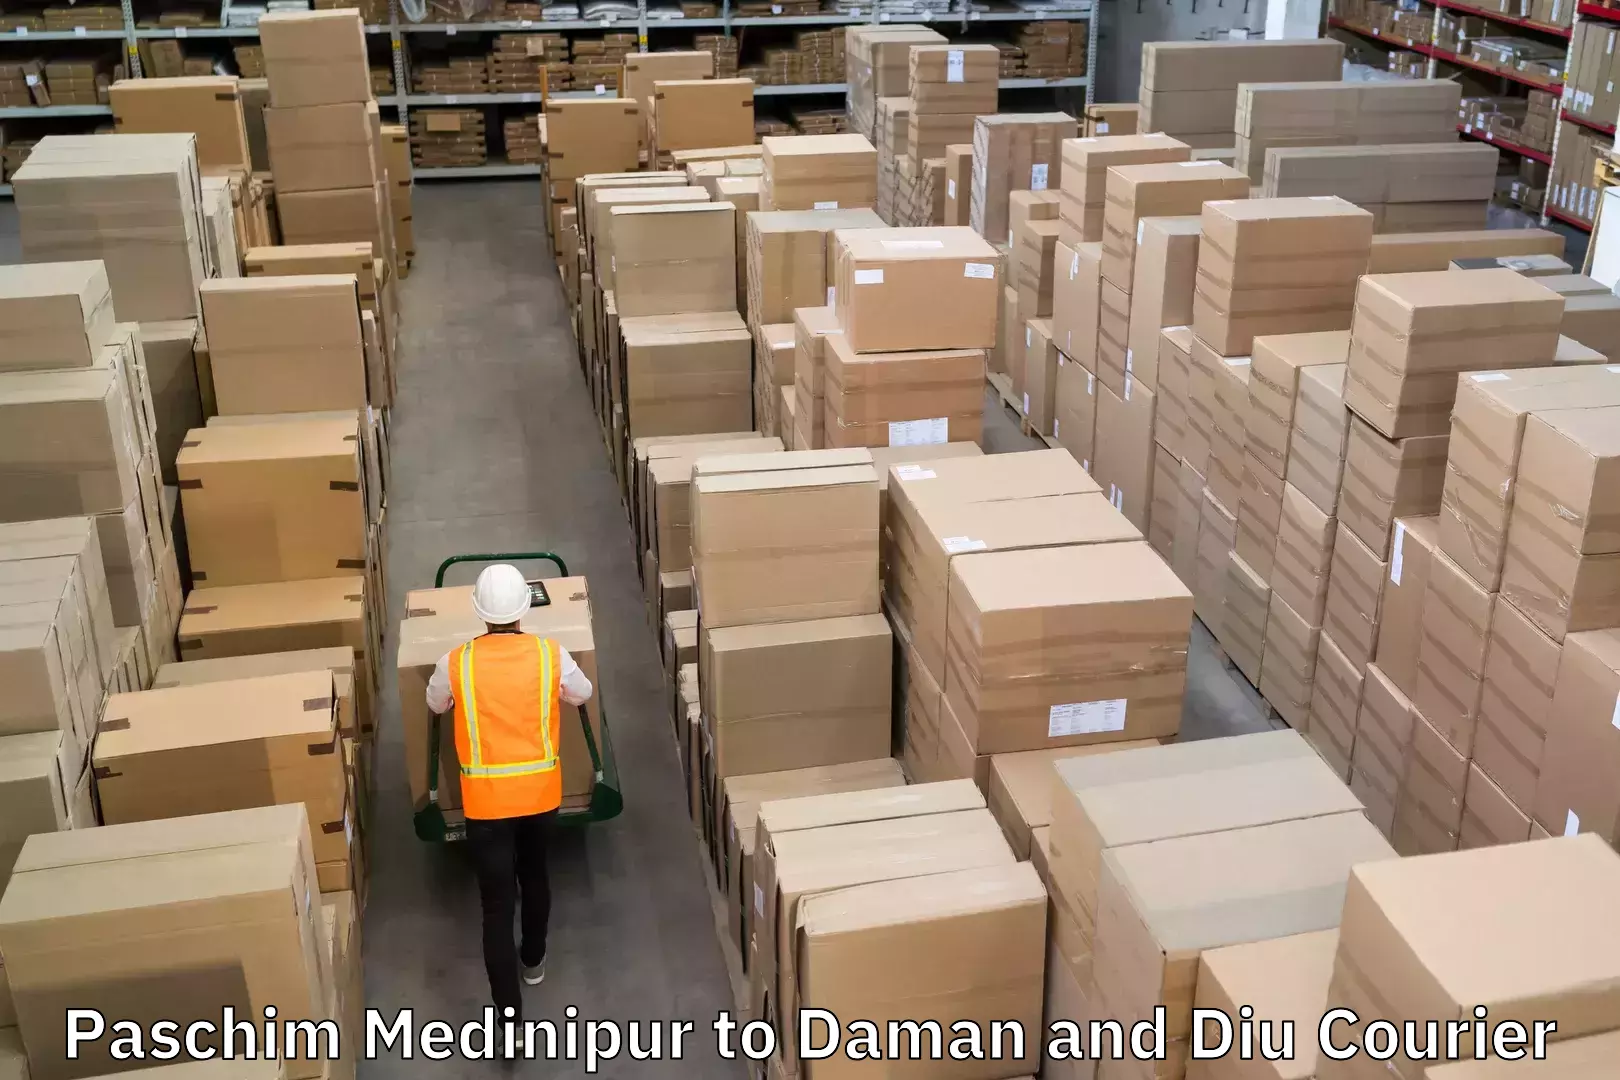 High-speed parcel service Paschim Medinipur to Daman and Diu